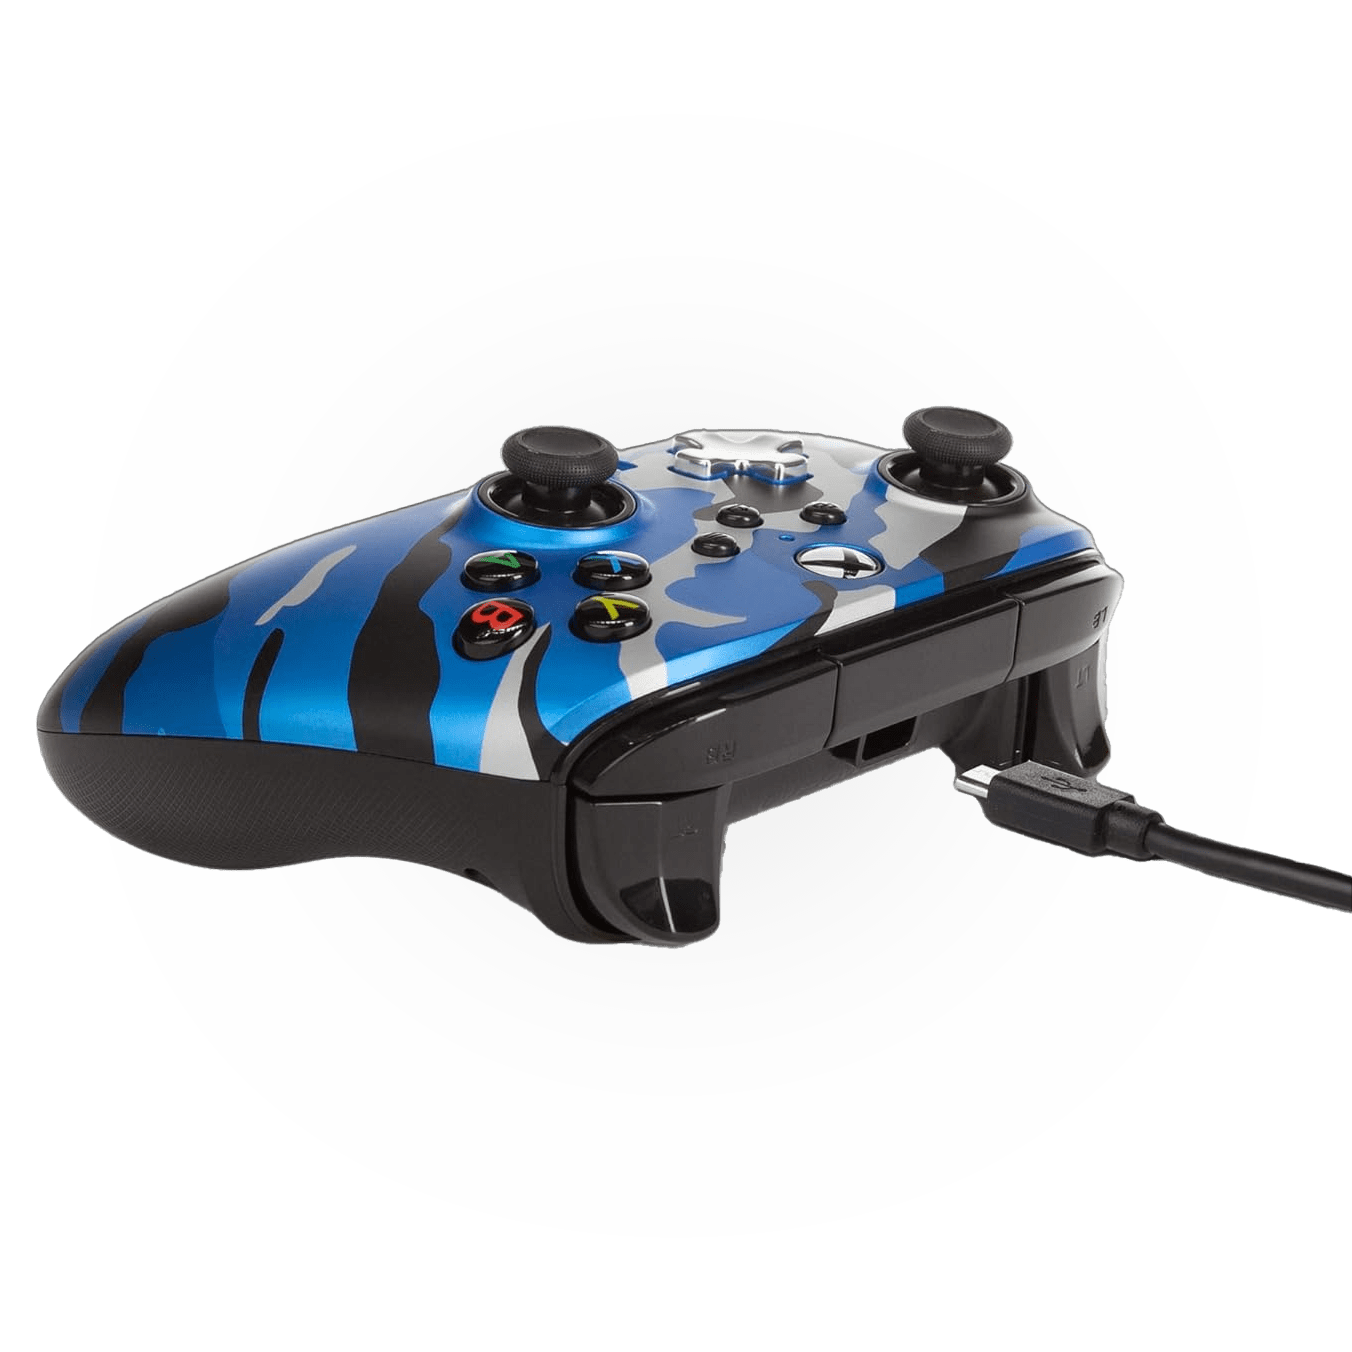 PowerA Enhanced Wired Controller For Xbox Series X|S With 2 Re-mappable Buttons - Metallic Blue Camo - ModdedZone